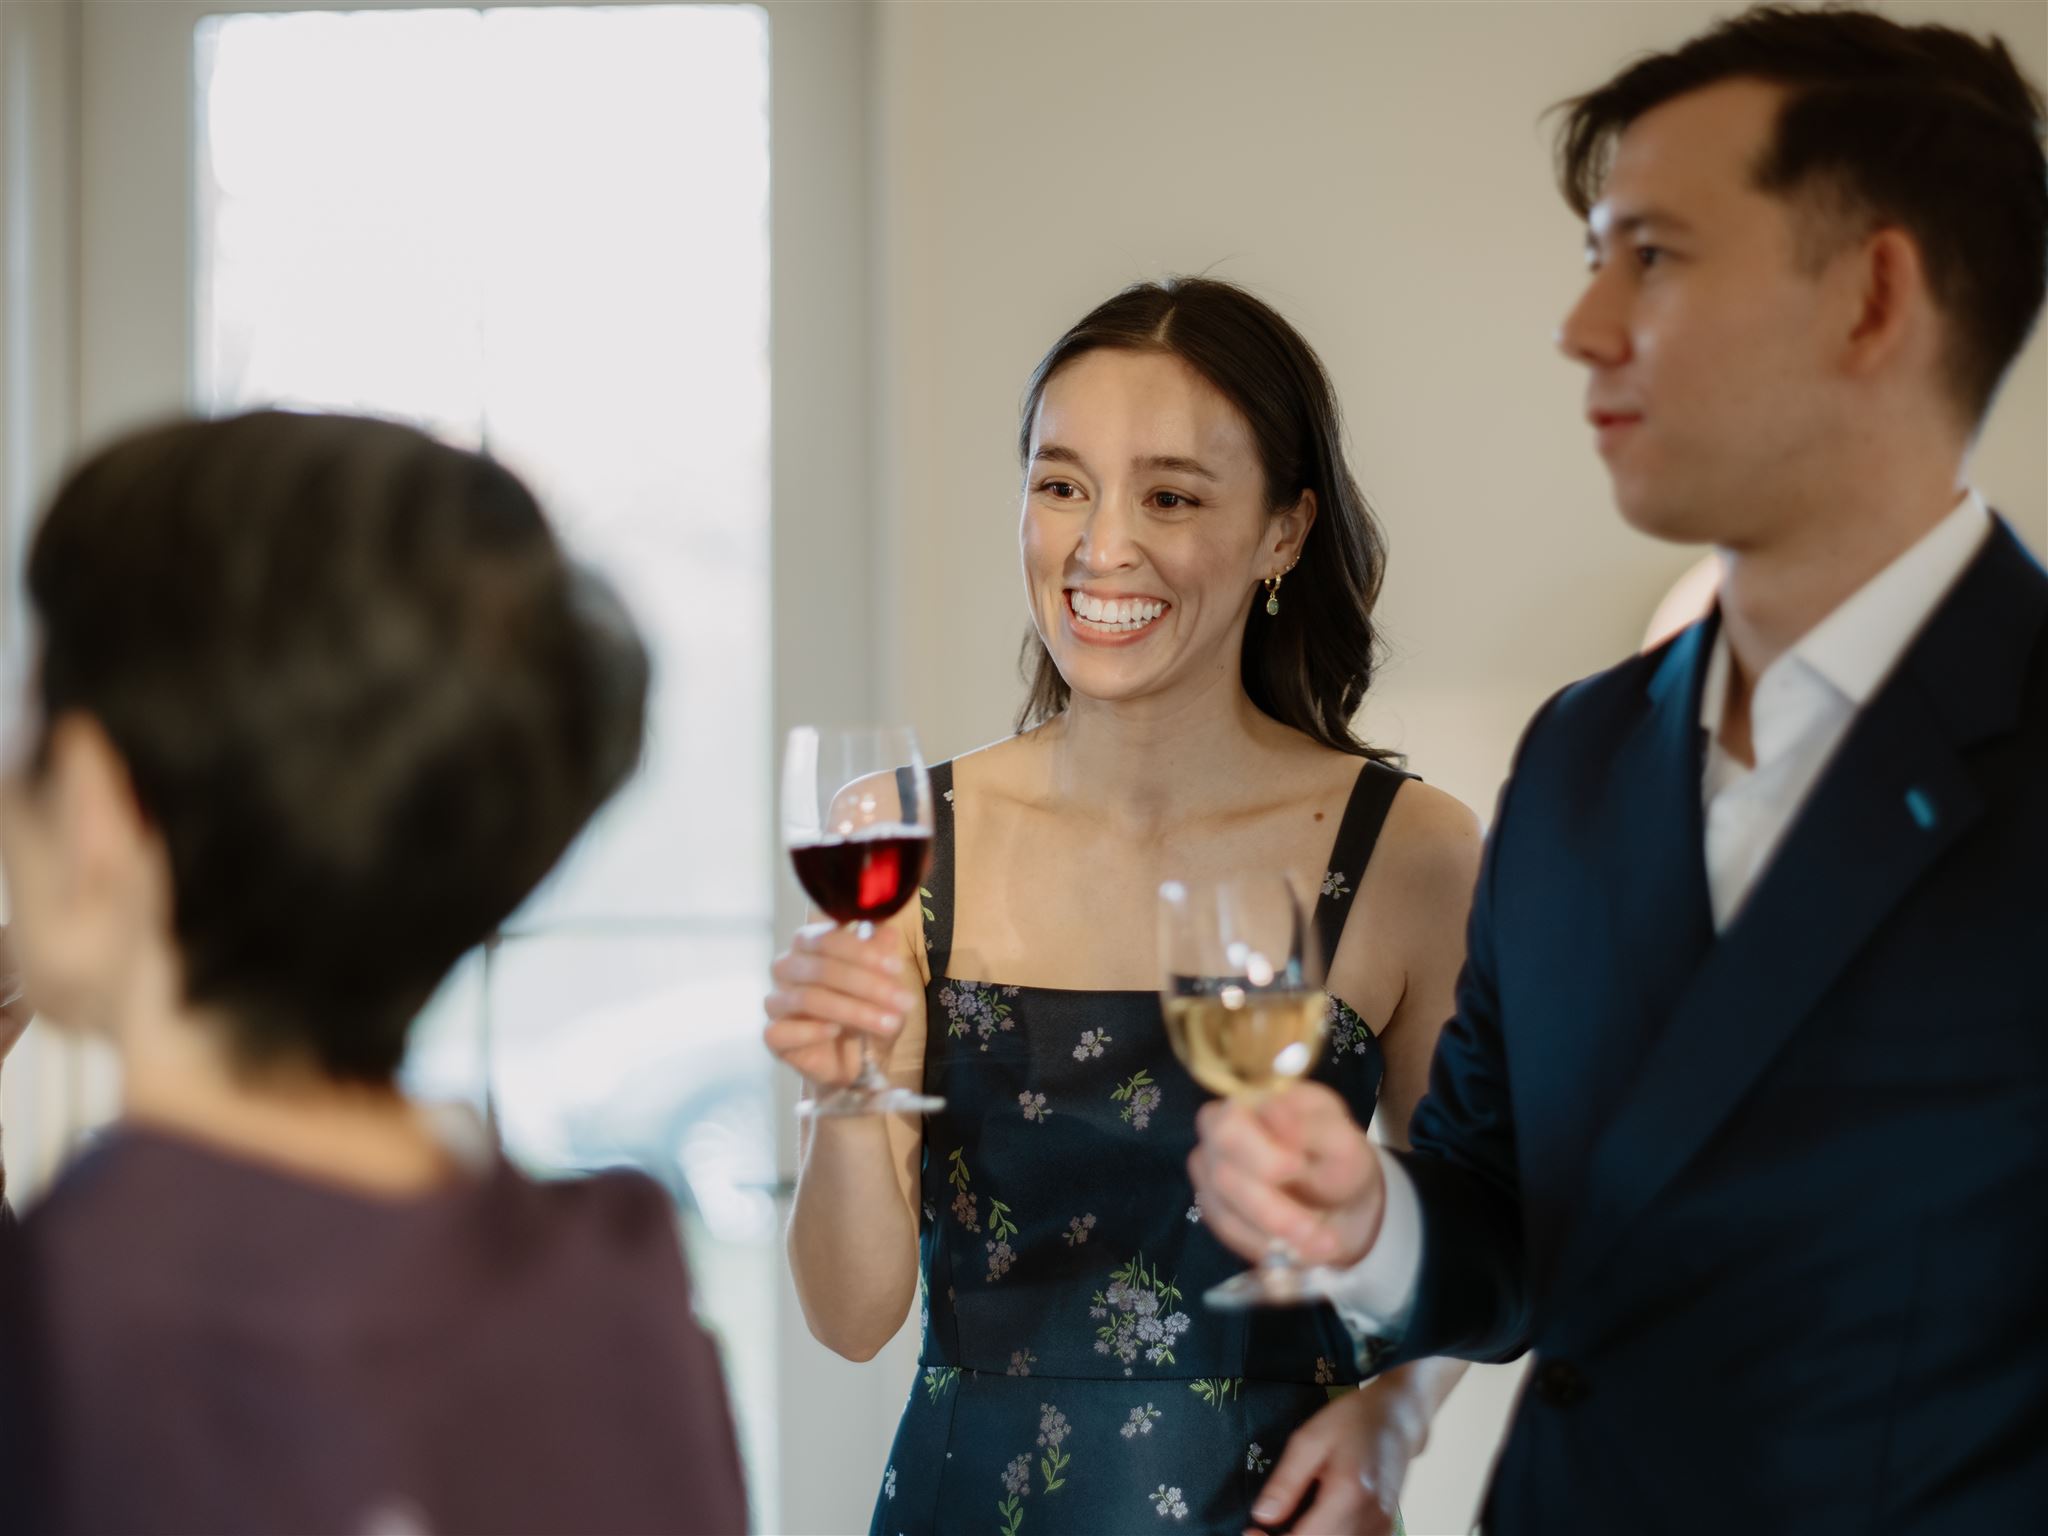 The bride and groom-to-be enjoy chatting with guests over a glass of wine in their welcome dinner. Image by Jenny Fu Studio